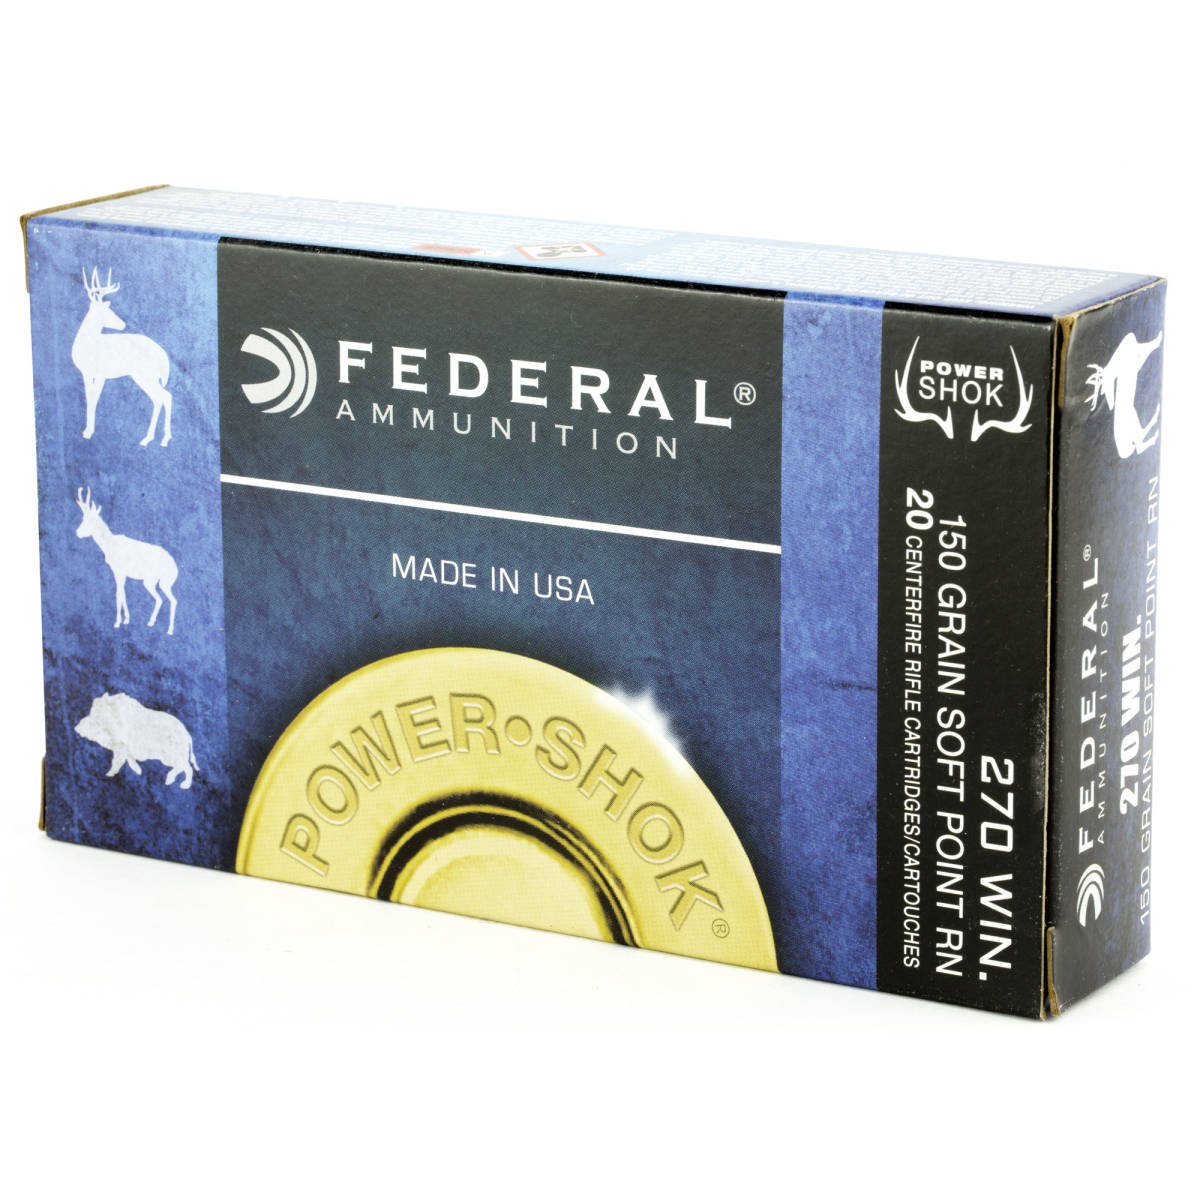 FEDERAL 270 WIN 150GR AMMO SOFT POINT HUNTING .270-WIN SP RN 20 ROUNDS-img-1